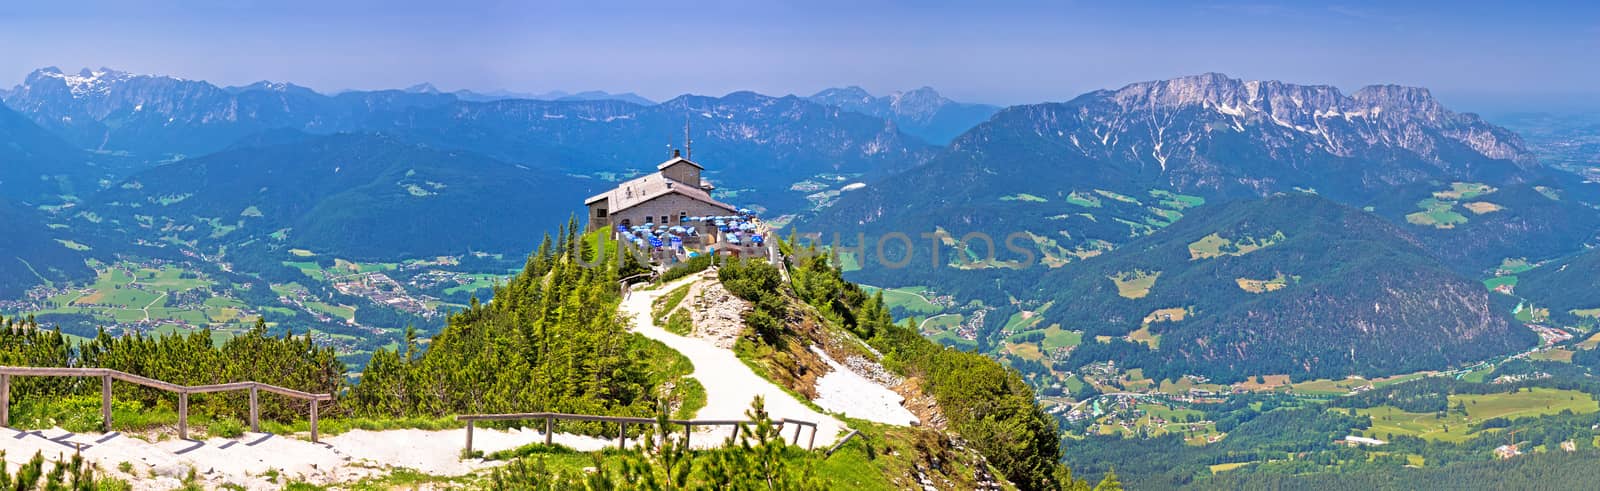 Eagle's Nest or Kehlsteinhaus hideout on the rock above Alpine l by xbrchx